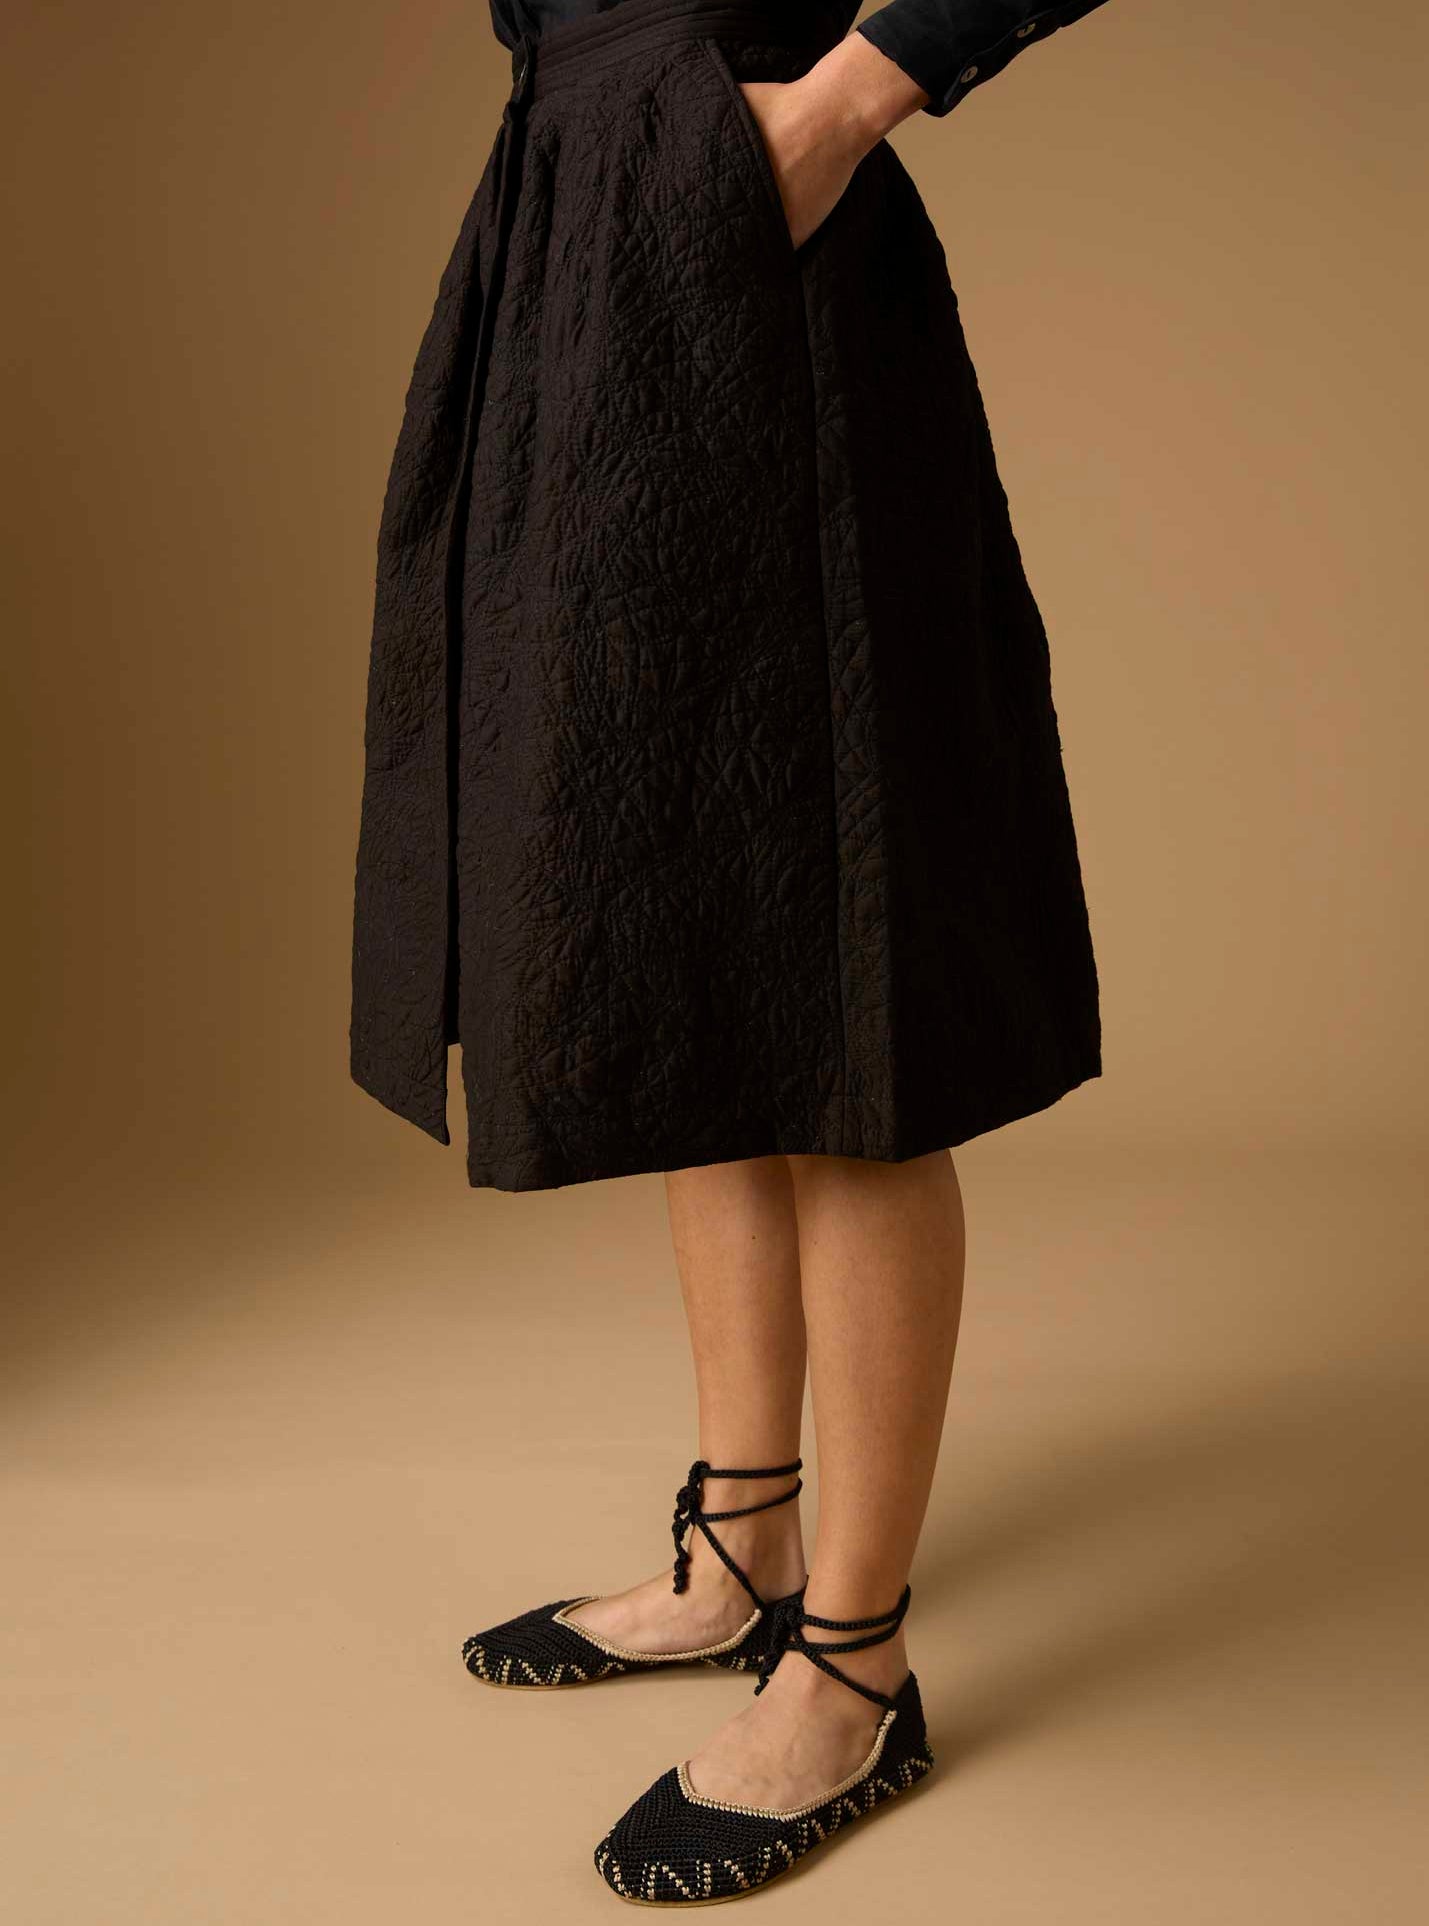 Riviera Black quilted skirt under the knees - Thierry Colson Pre Spring Collection boutis theme, traditional Provencal technic of quilting  